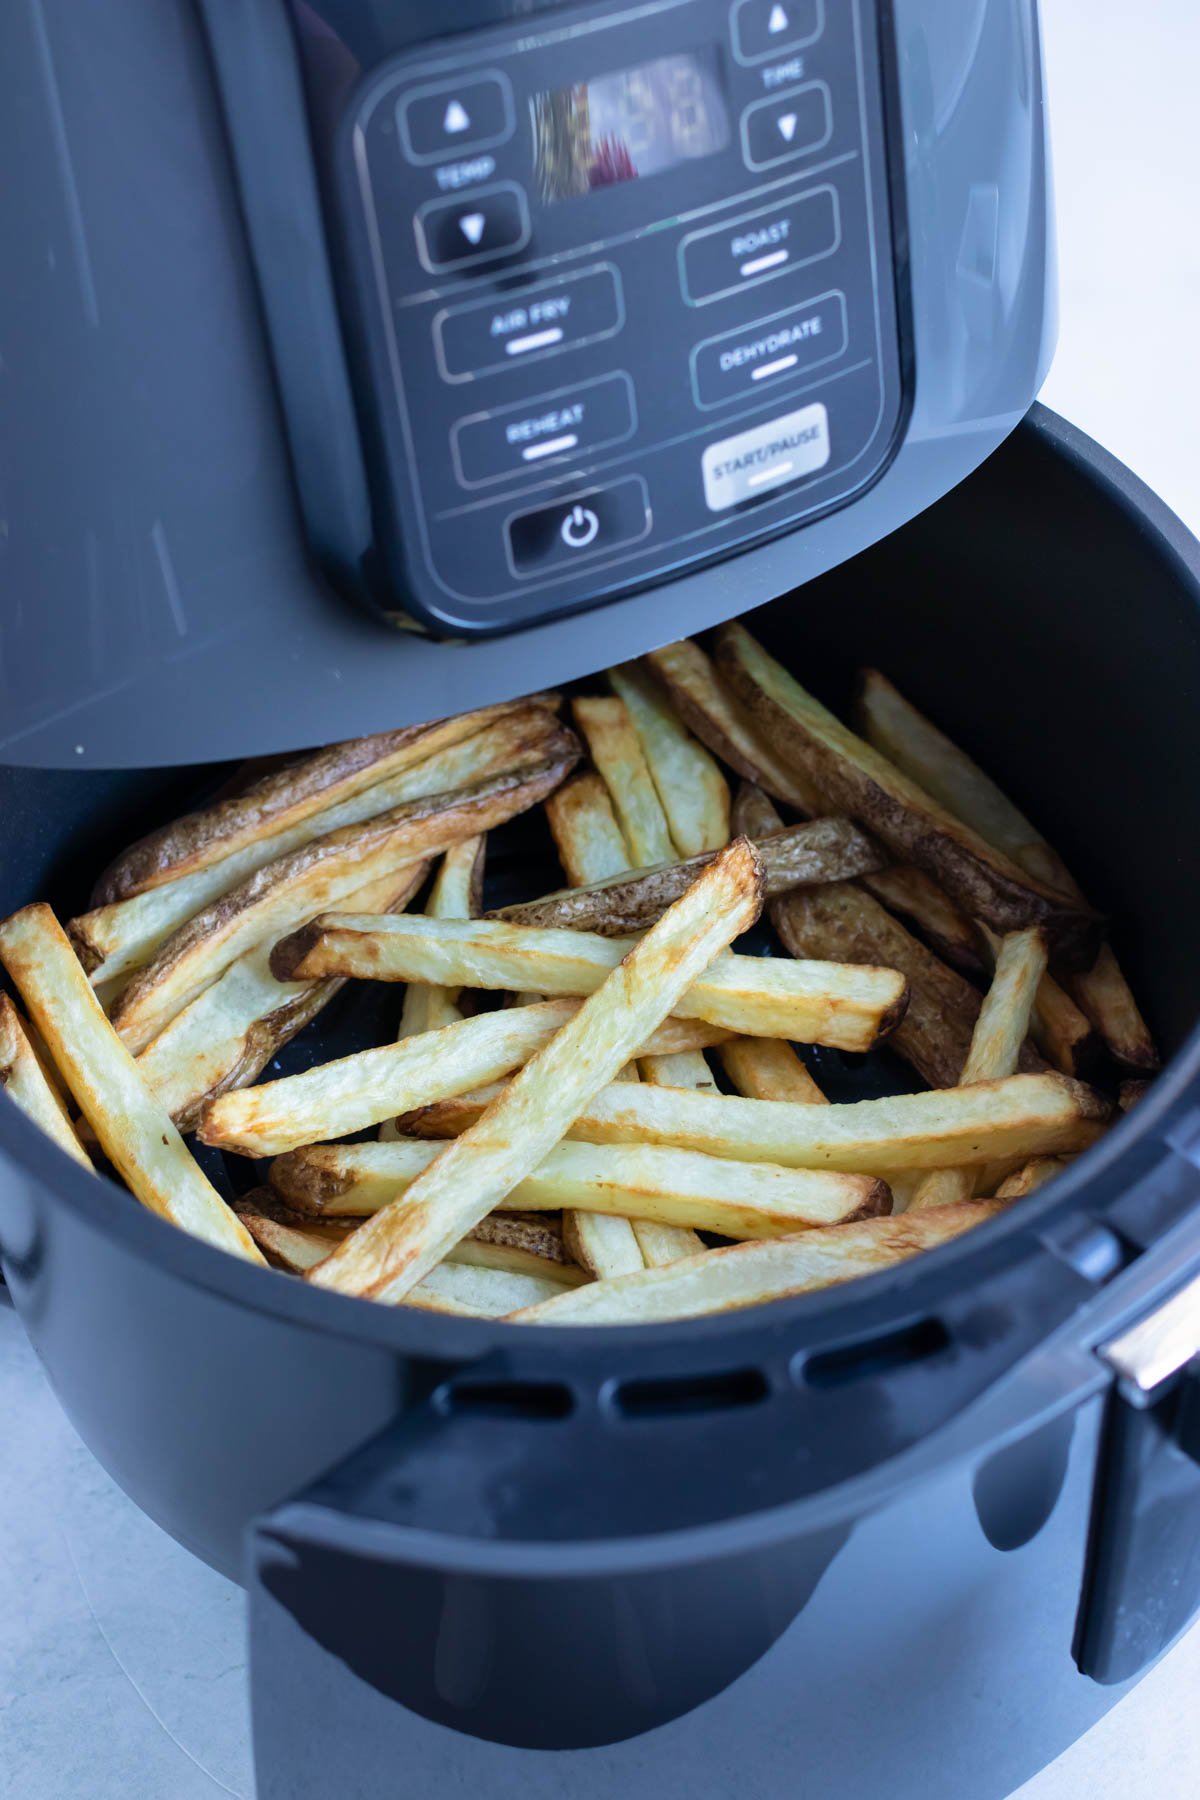 Crispy french fries are cooked in a Ninja air fryer.